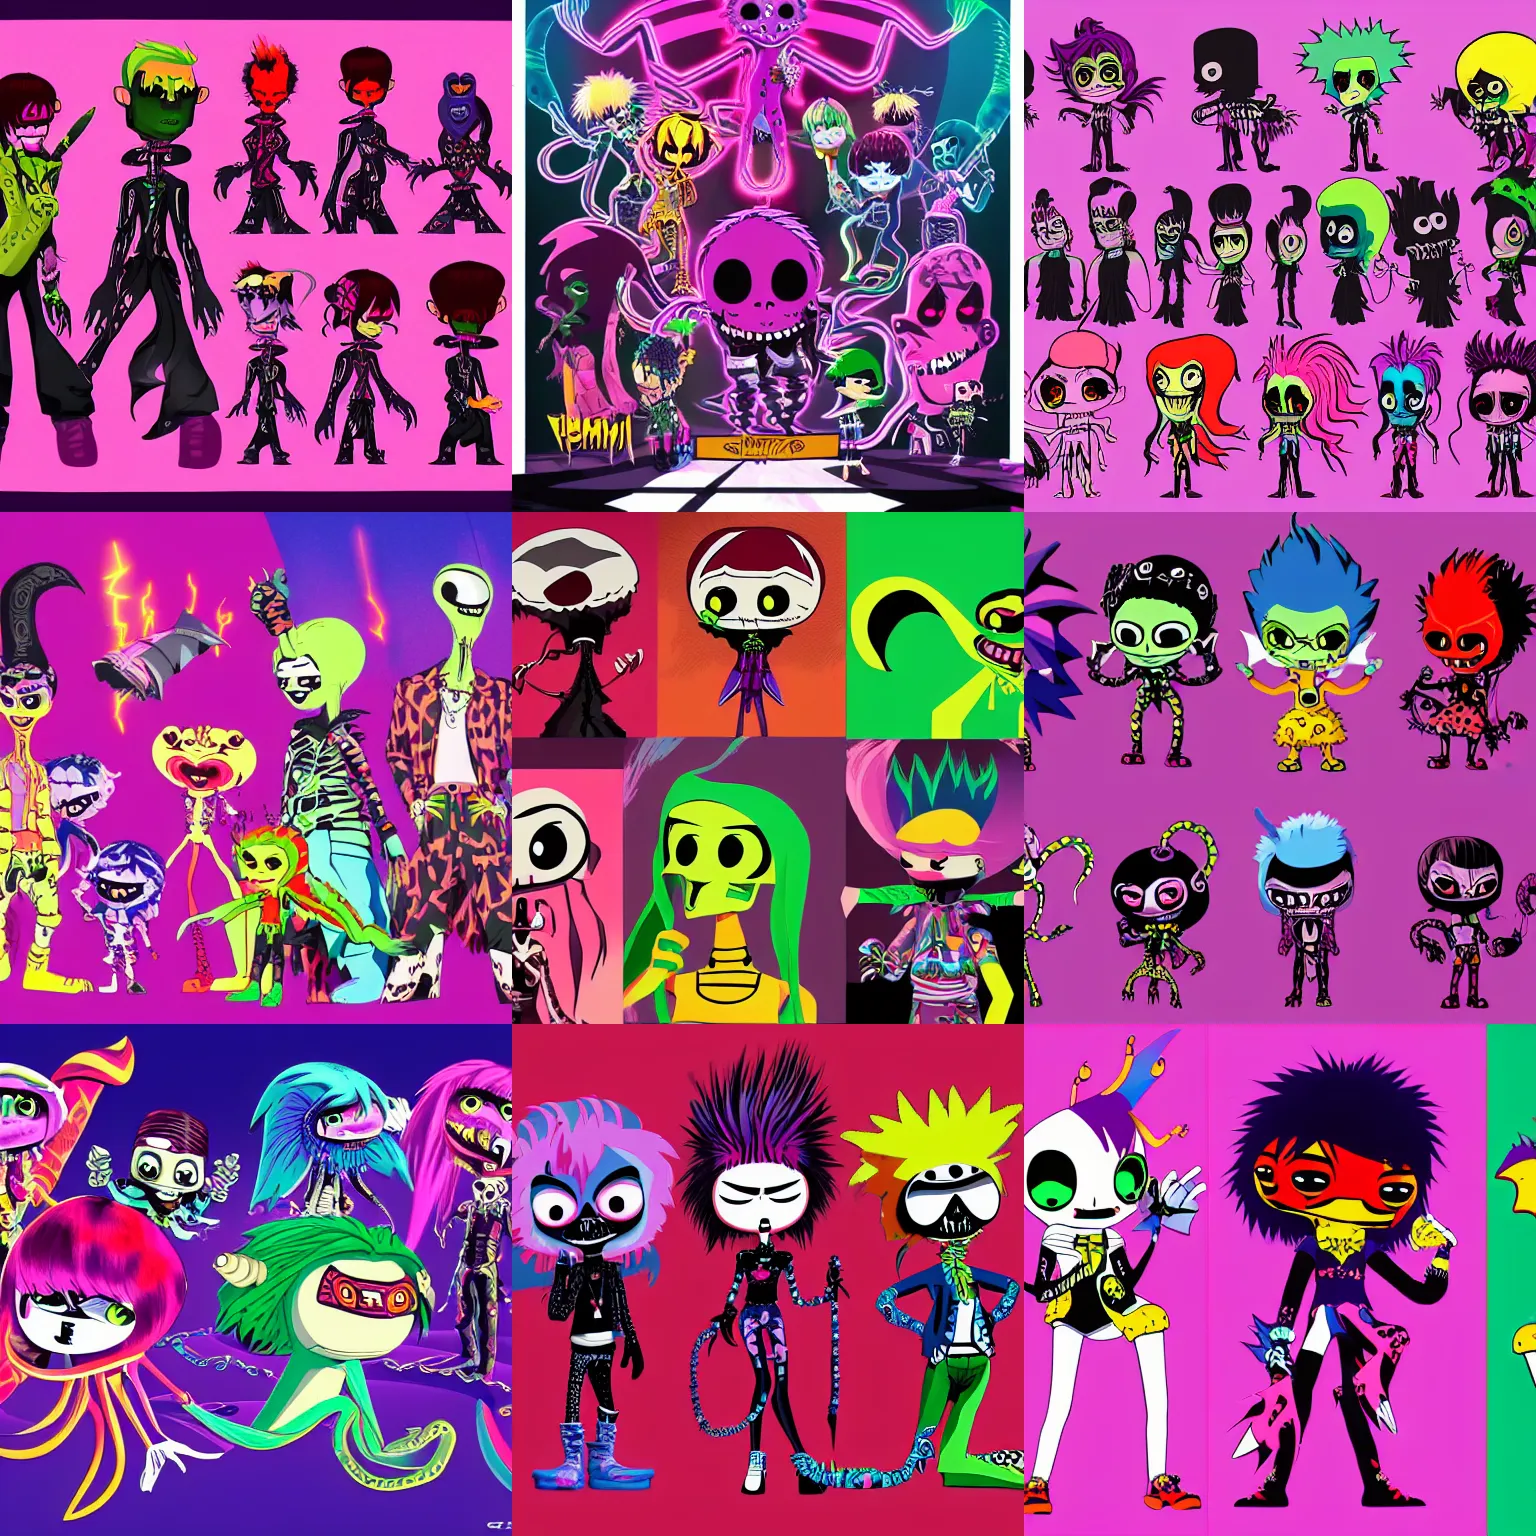 Prompt: CGI lisa frank gothic punk vampiric electrifying vampiric squid character designs of varying shapes and sizes by genndy tartakovsky and Jamie Hewlett from gorillaz high resolution, rtx